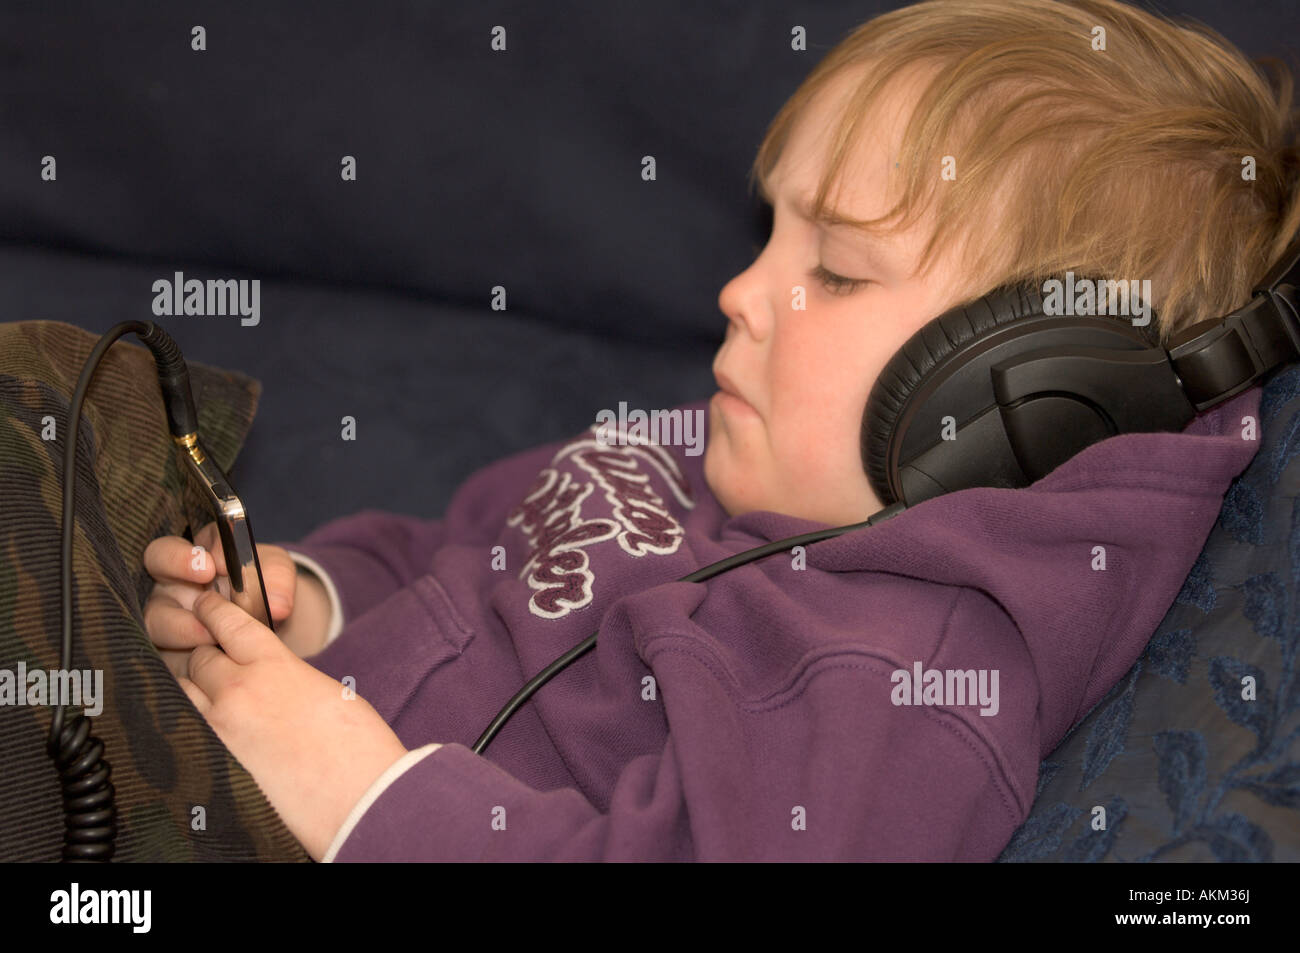 Young child engrossed in watching and listening to a movie (film) via large headphones on a compact mp3 player Stock Photo